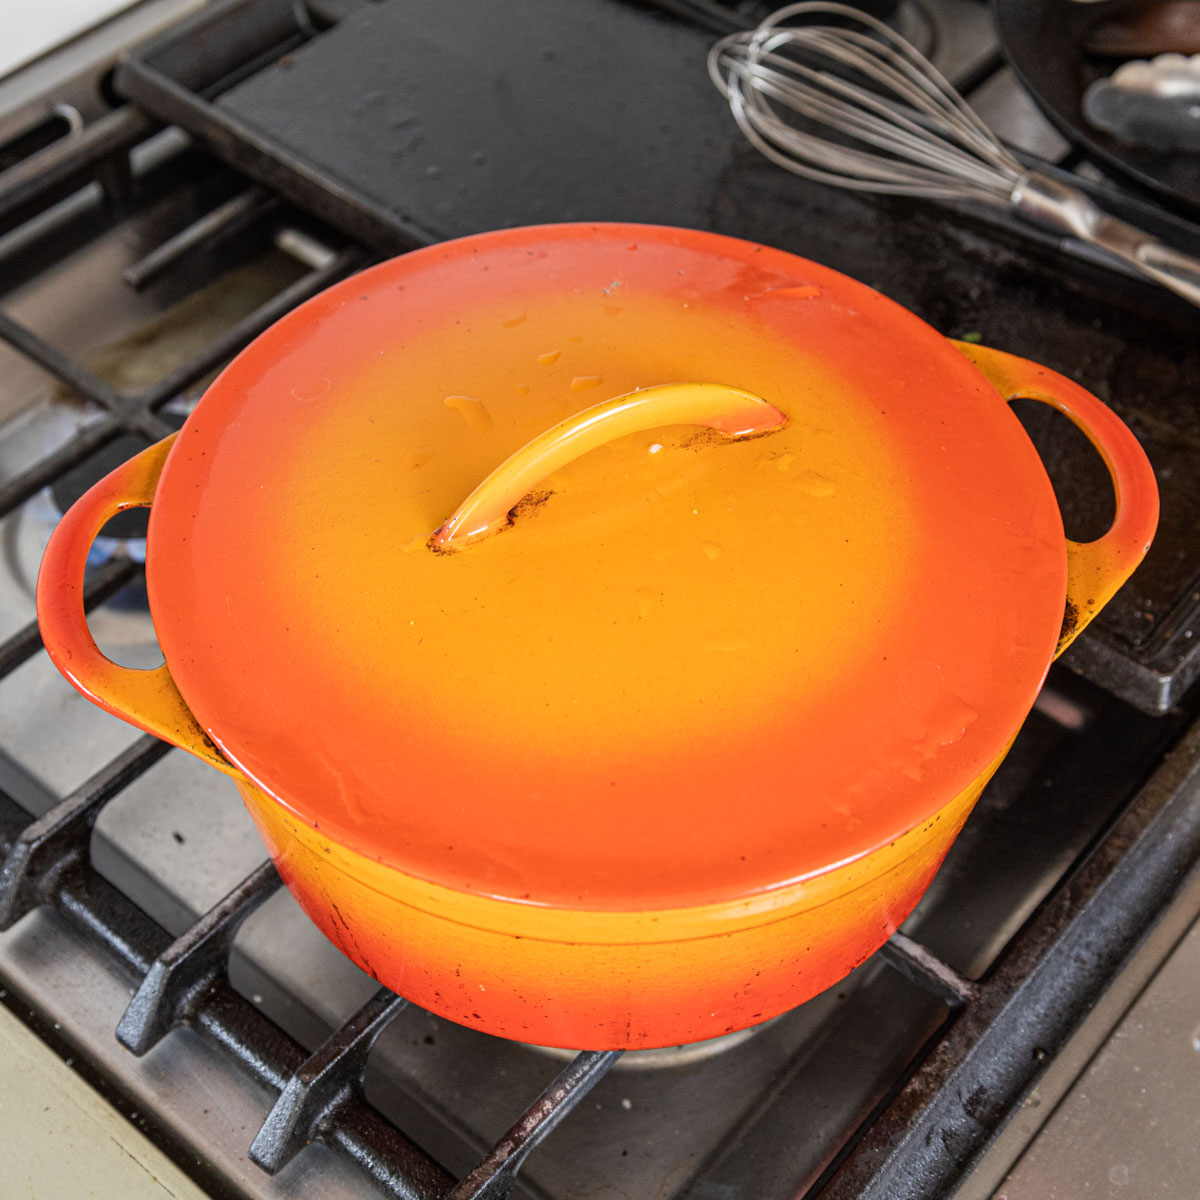 An orange enameled cast iron dutch oven with the lid on cooking over a burner.